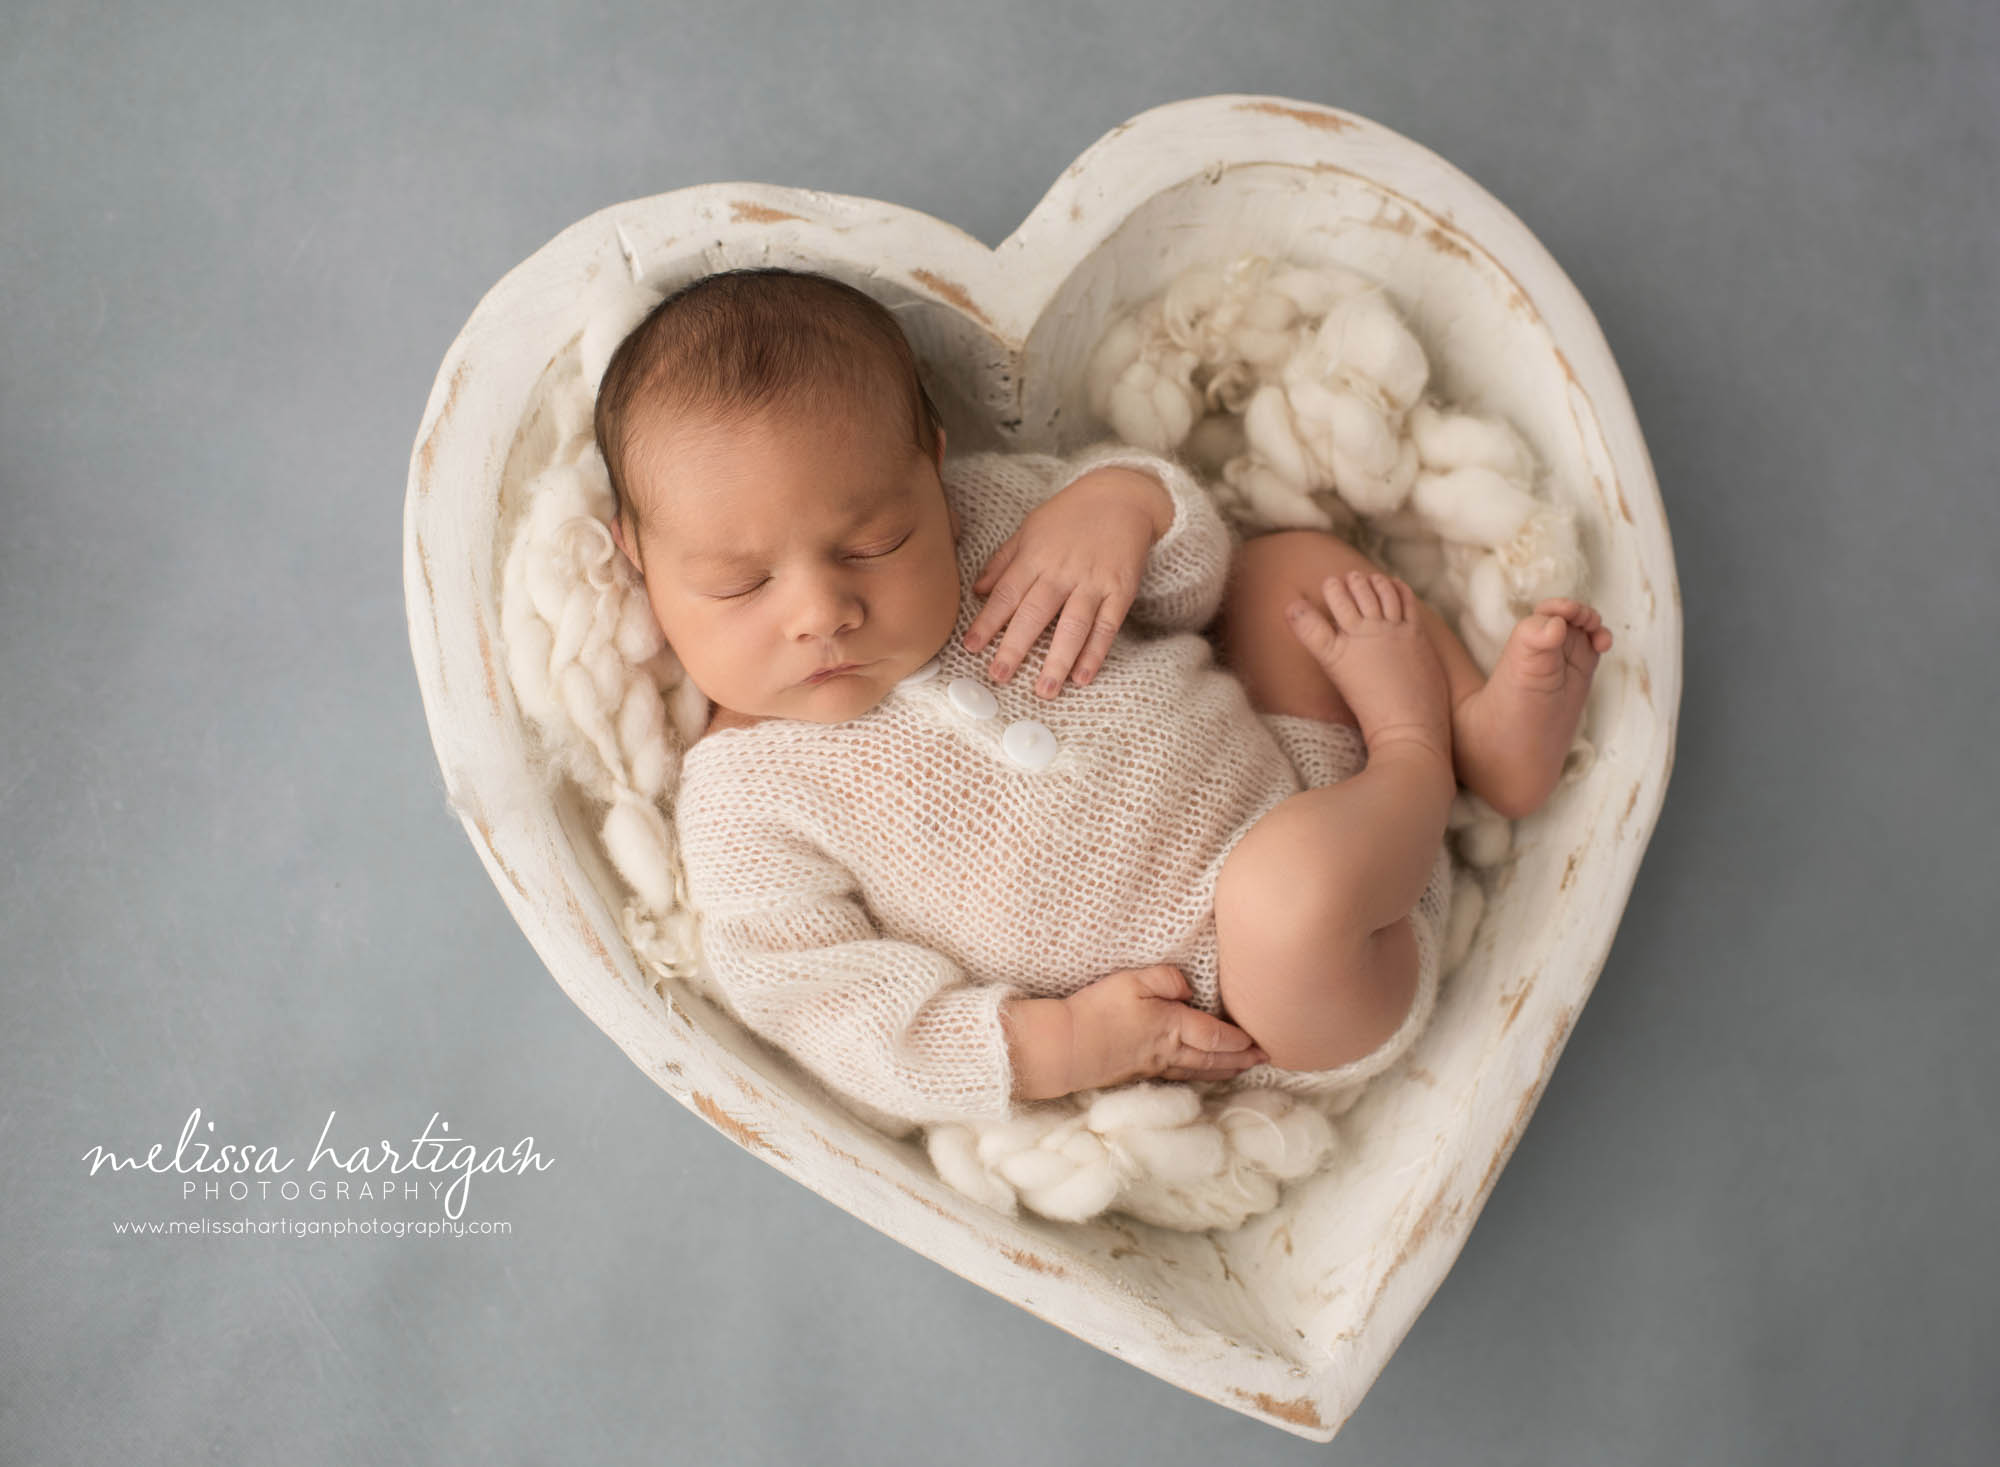 newborn baby boy posed in cream wooden heart shaped prop wearing knitted outfit newborn photography windham county ct